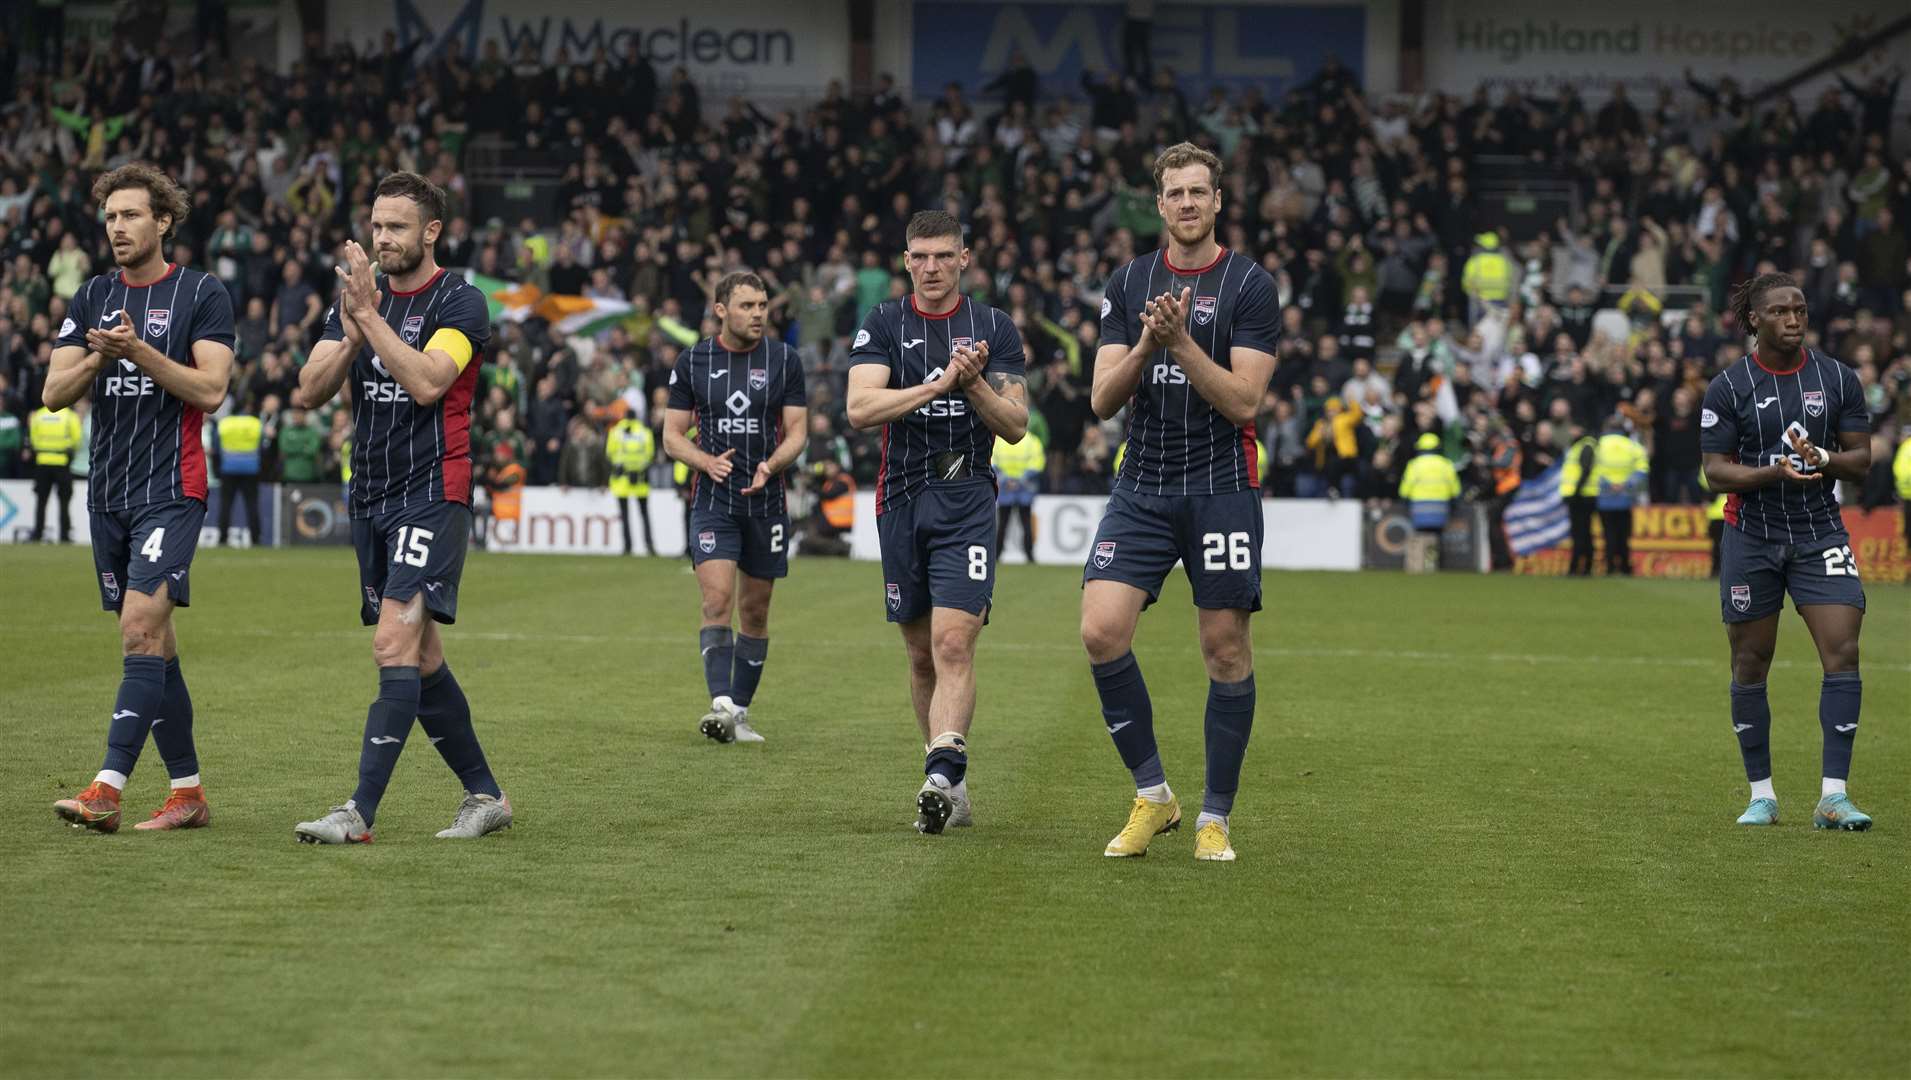 Applauding their fans at the end were Ross County's David Cancola, Ross County's Keith Watson, Connor Randall, Ross Callachan, Jordan White, and Joseph Hungbo.